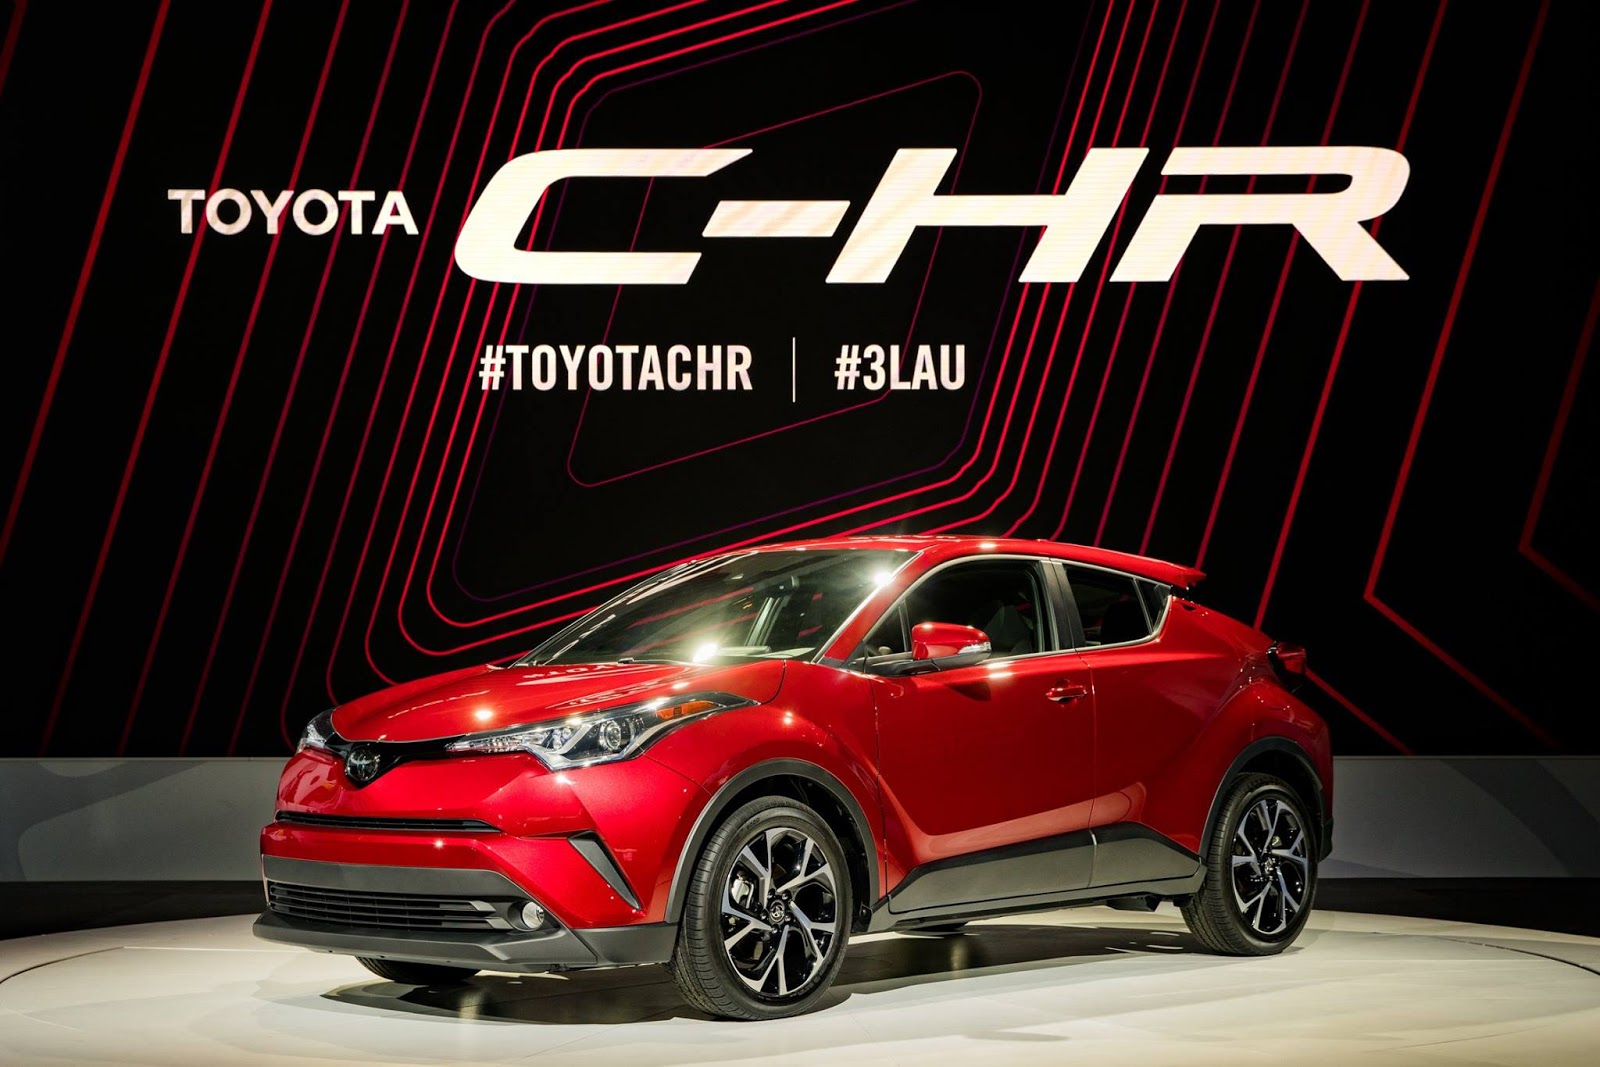 Toyota Launches US-Spec 2018 C-HR Compact Crossover | Carscoops1600 x 1067